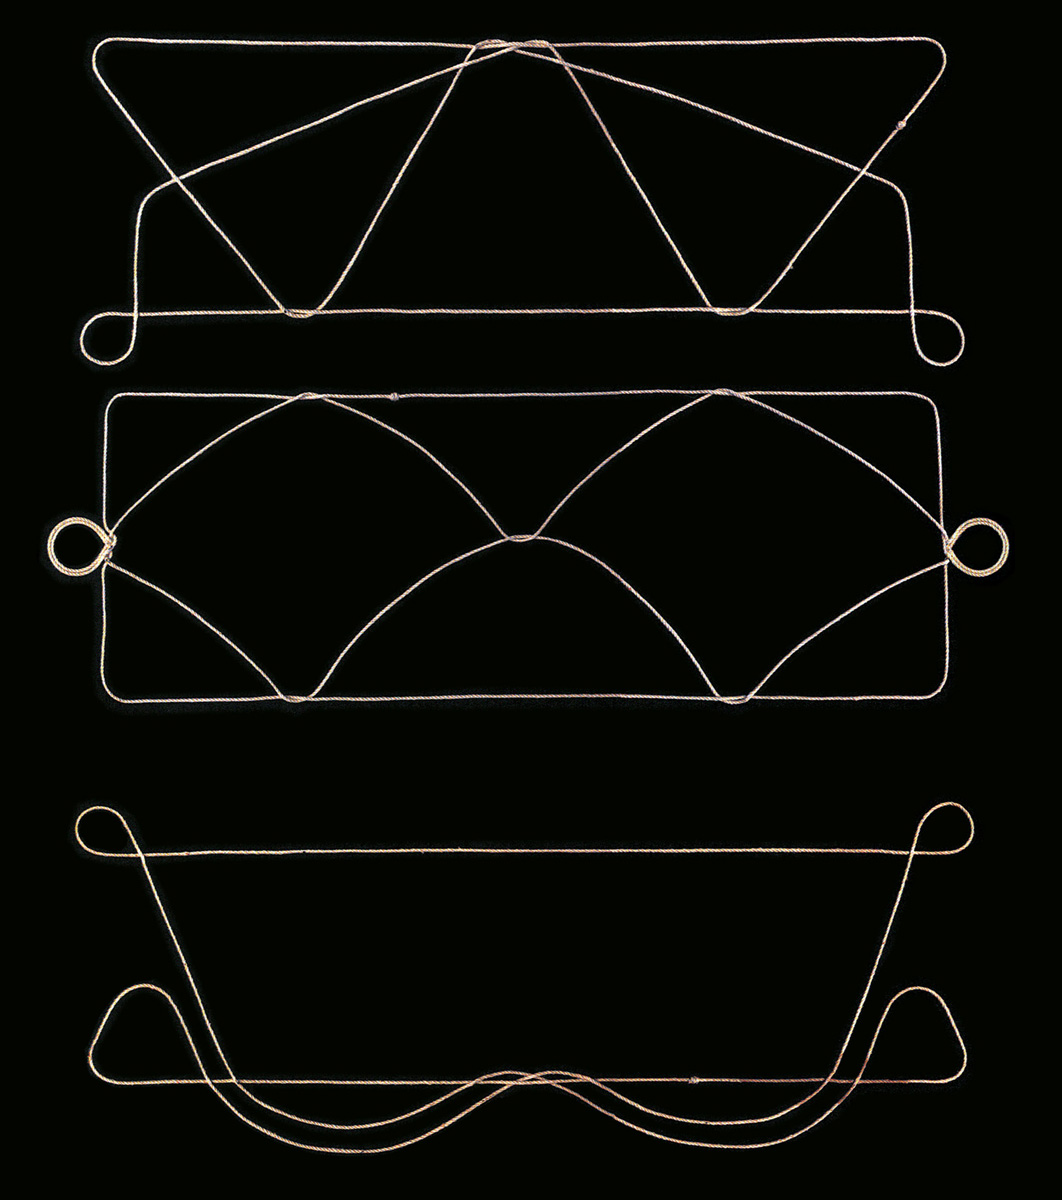 A page from Harry Smith’s album of string games. 